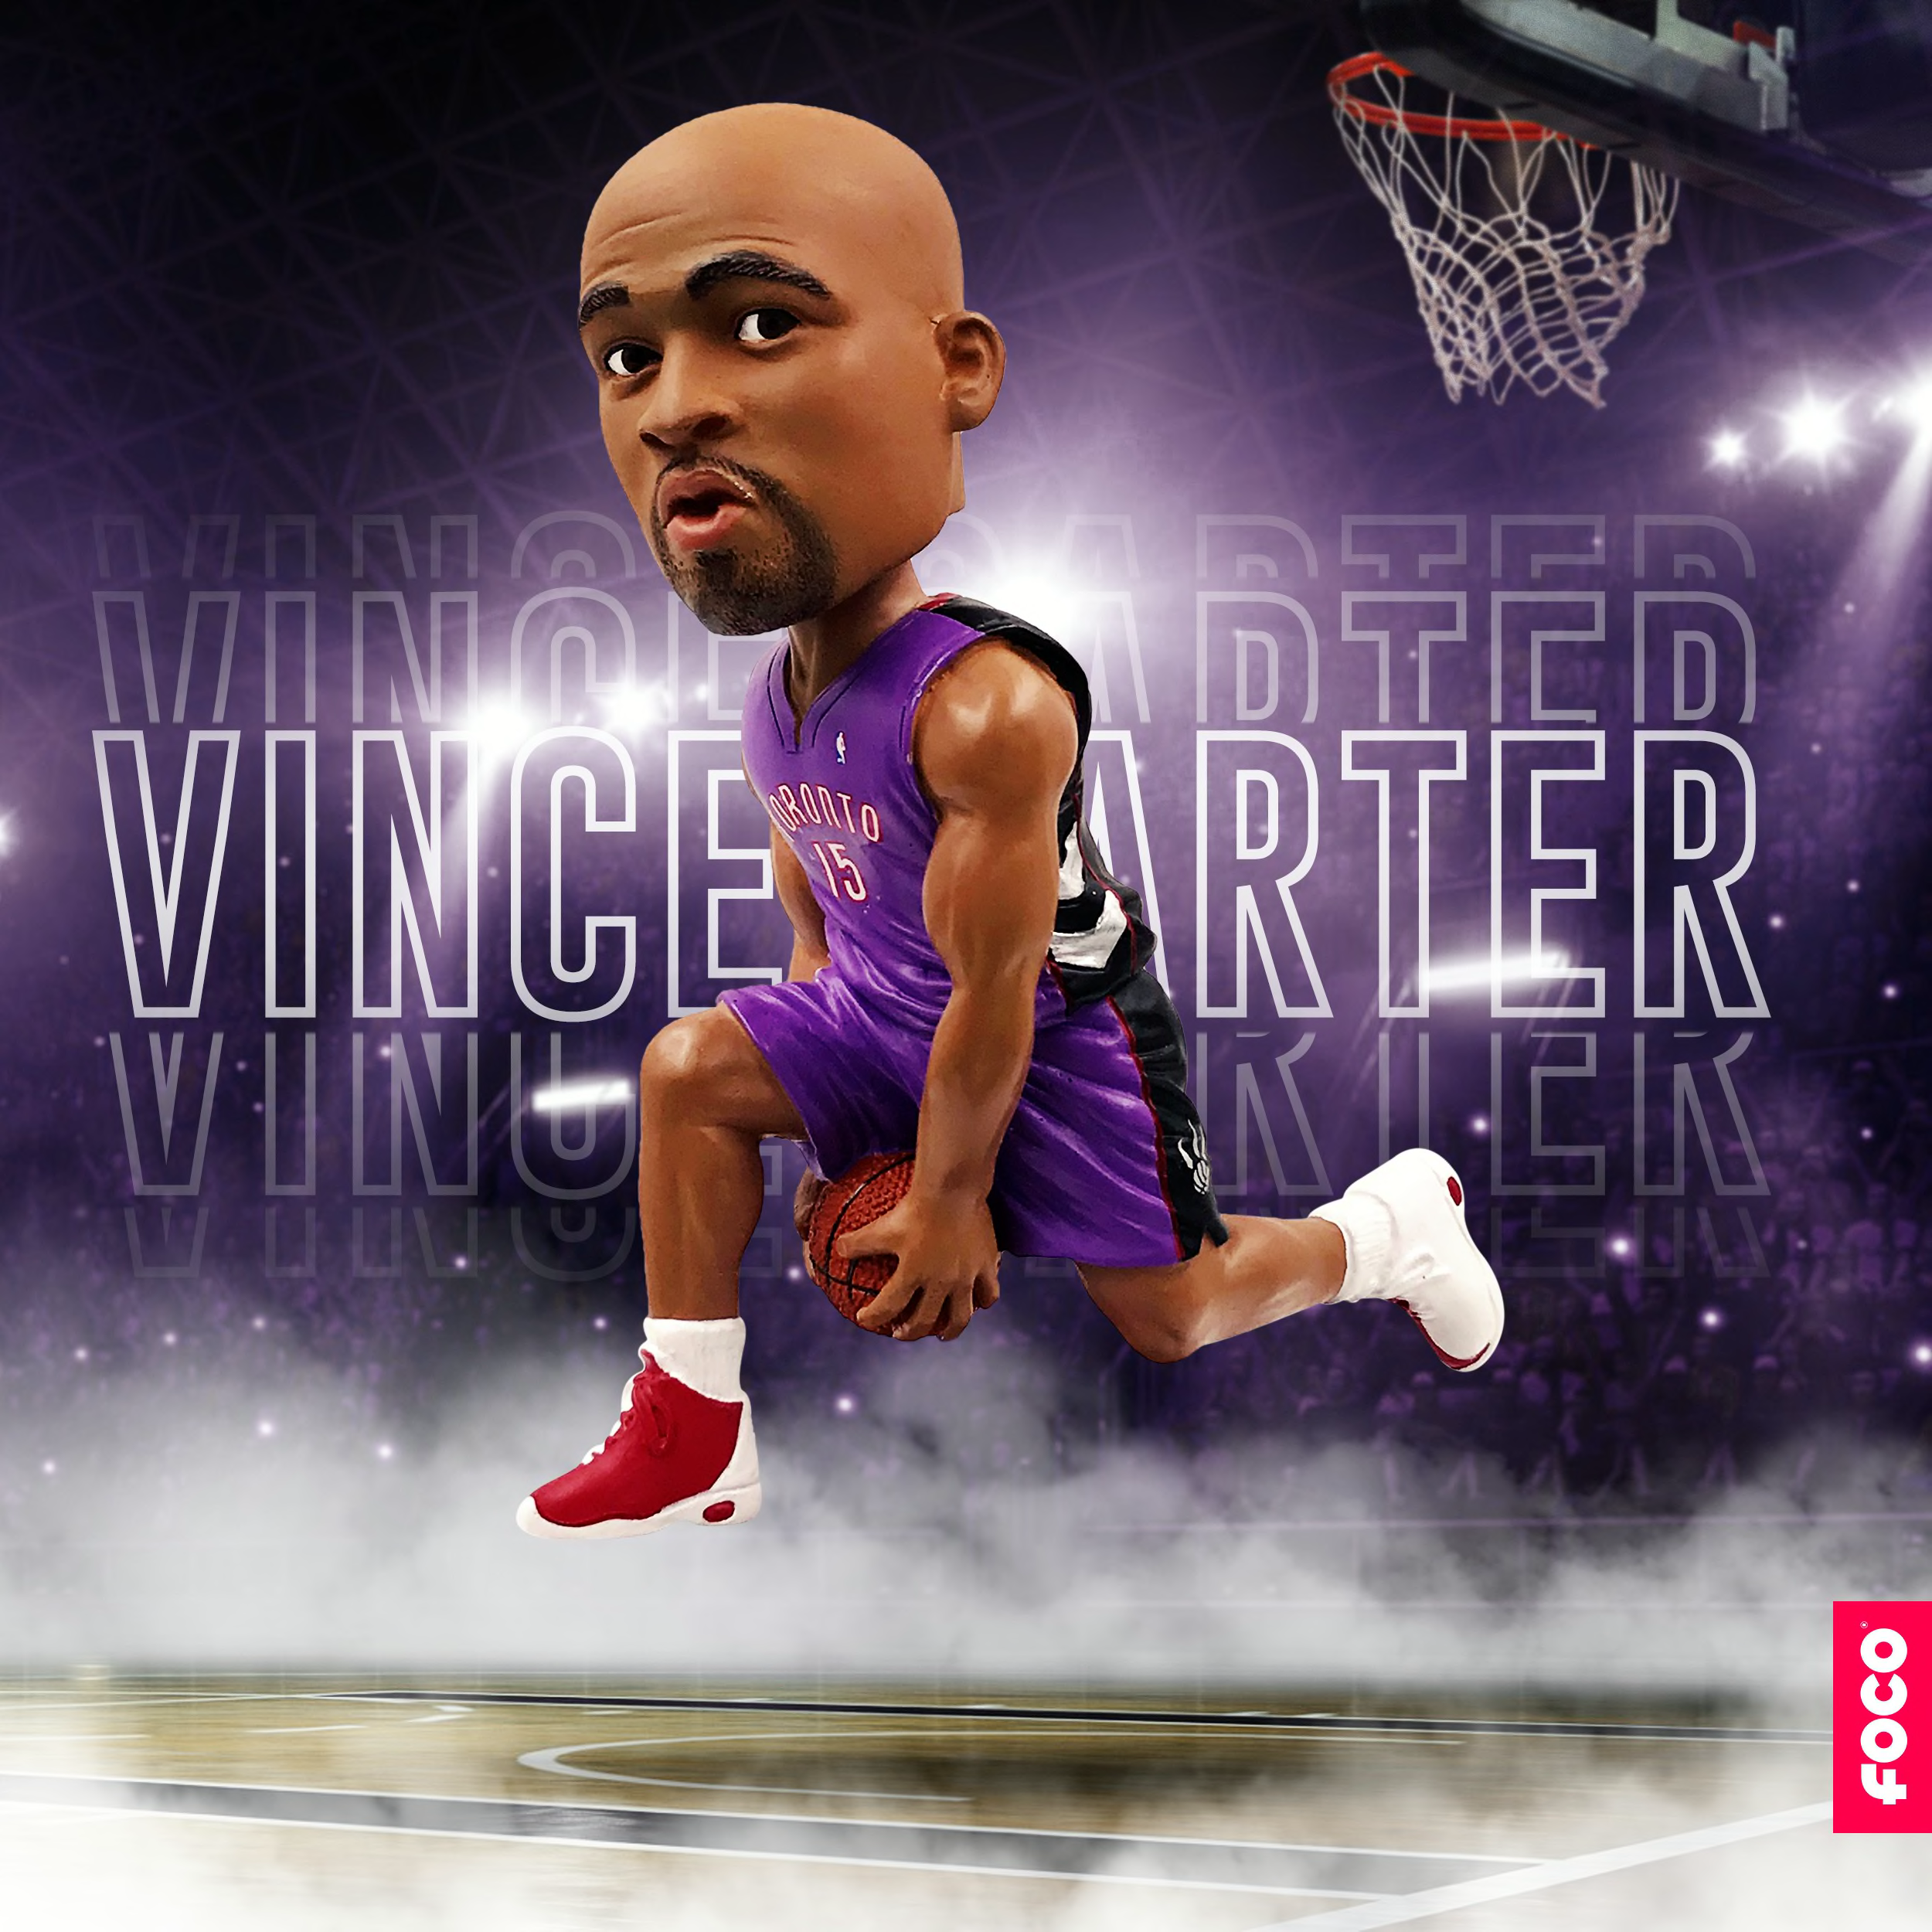 Toronto Raptors: Relive Vince Carter's iconic dunk in bobblehead form